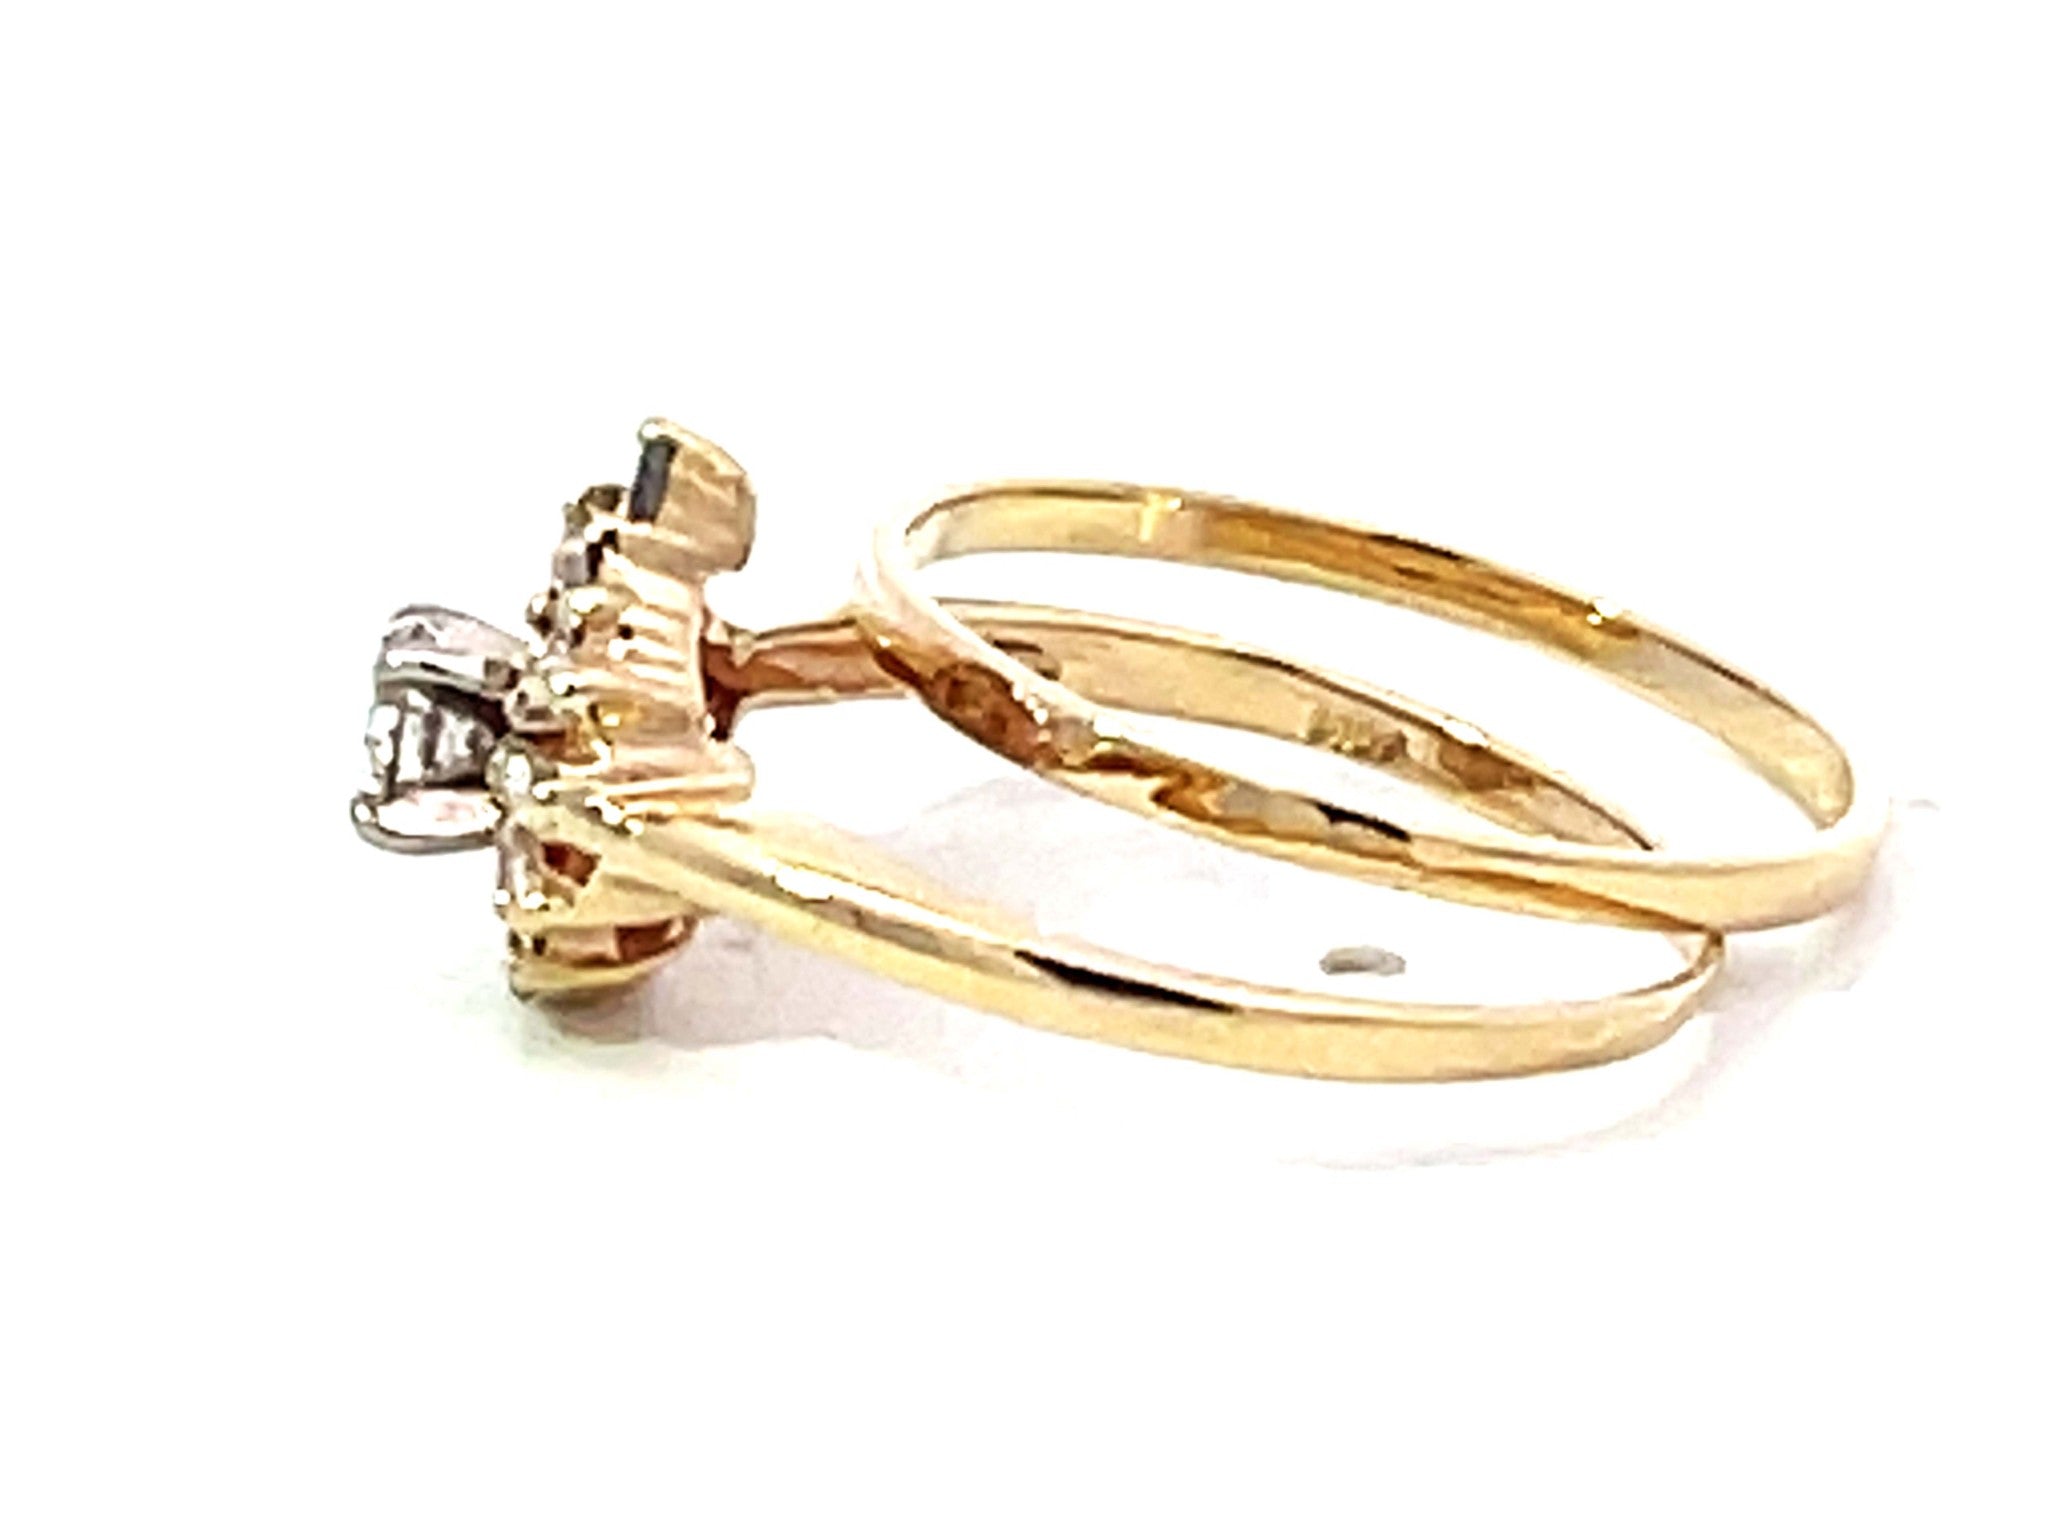 Diamond Flower Double Band Ring Solid 14K Yellow Gold